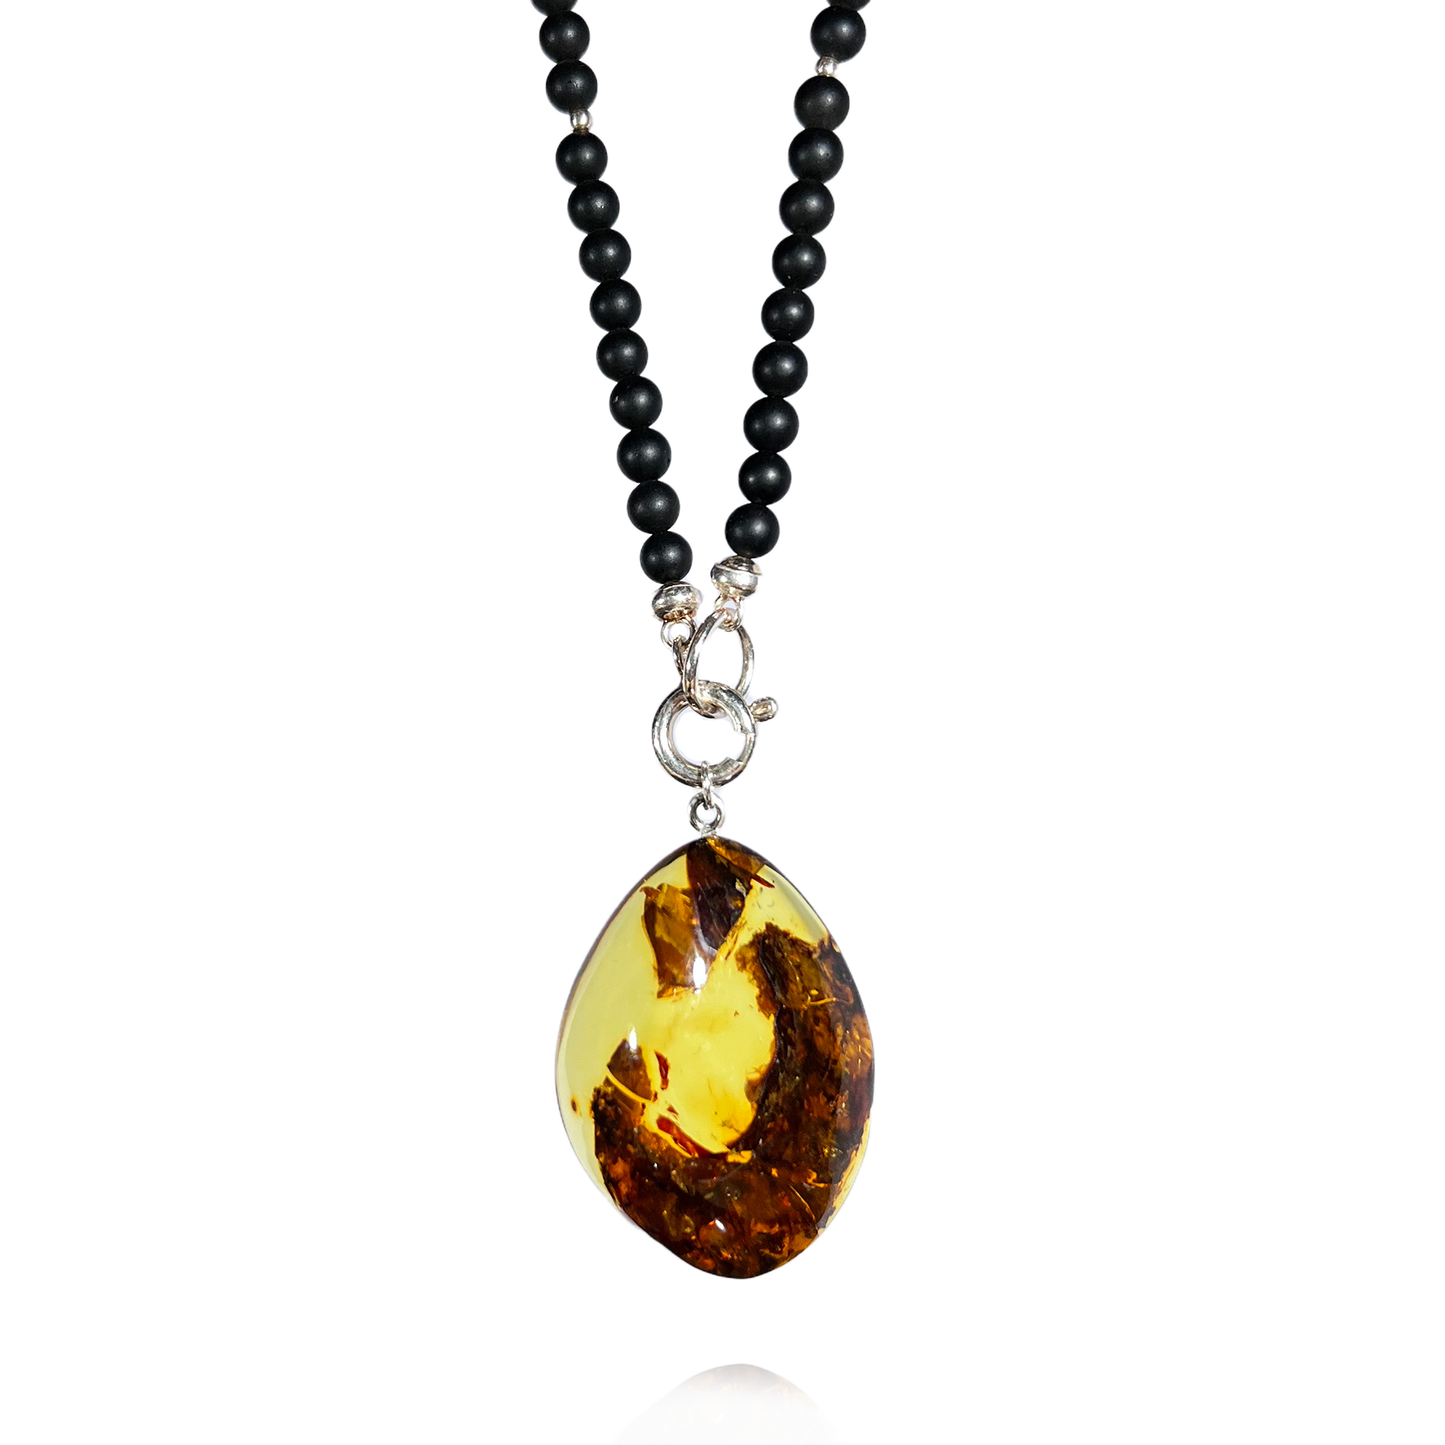 Amber necklace with pendant "River"